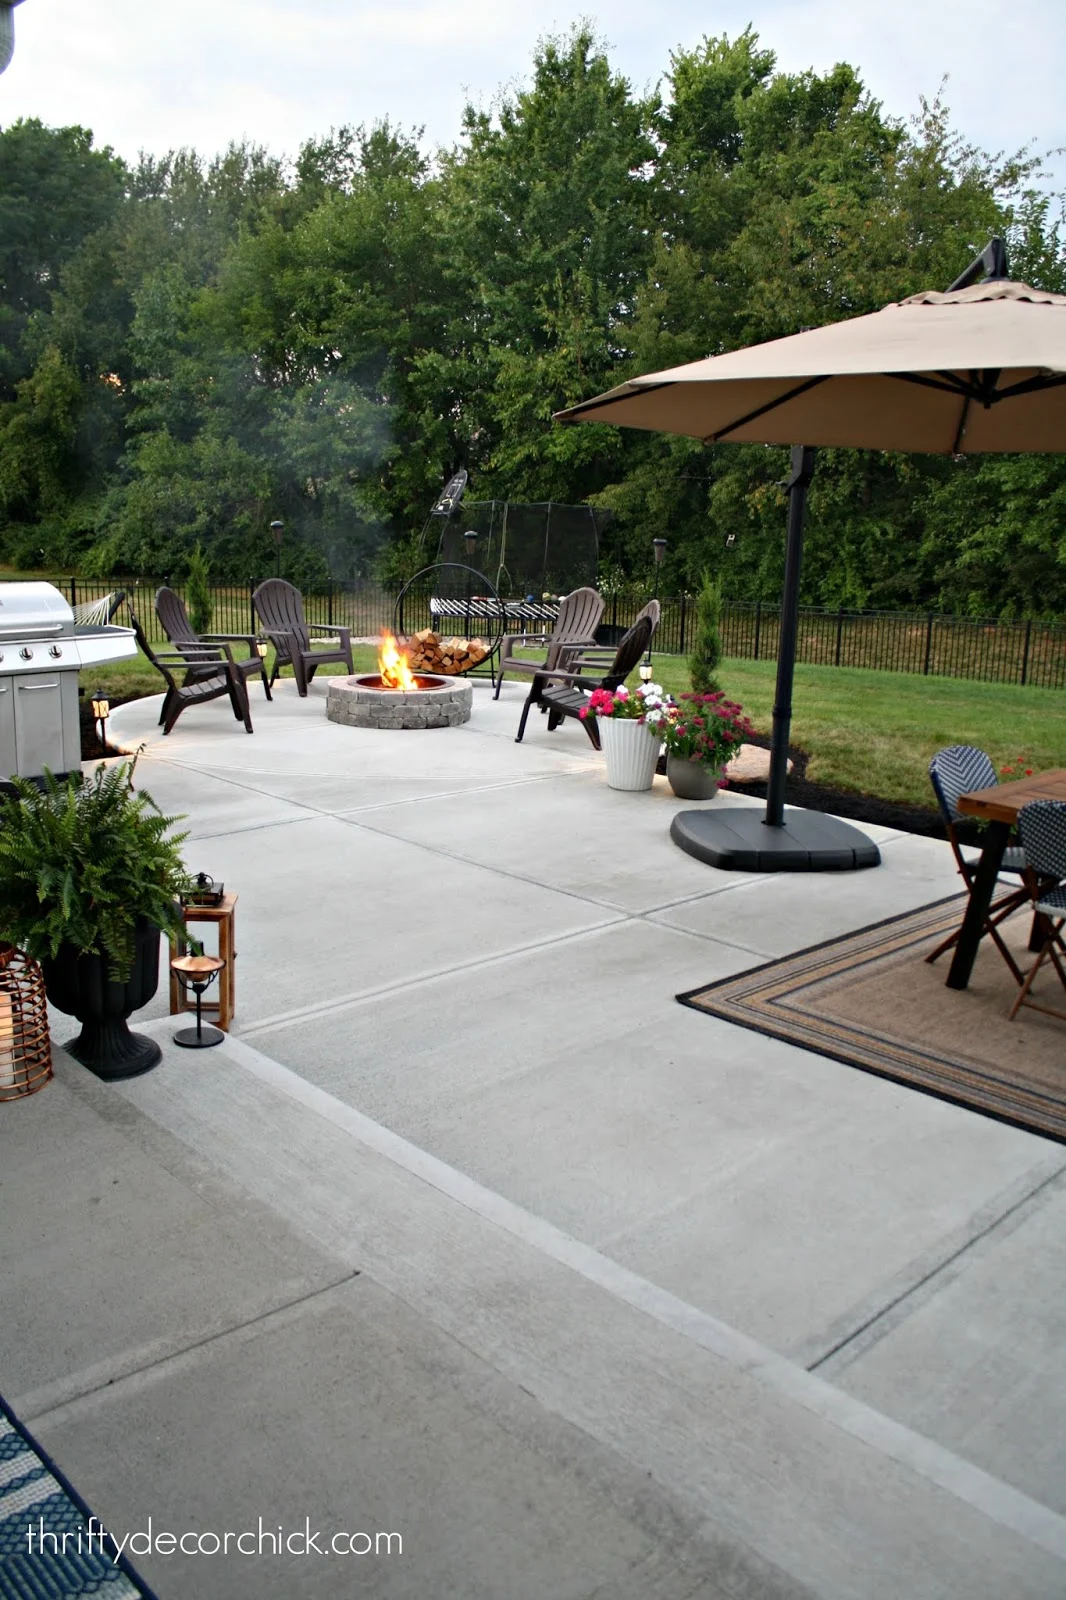 Concrete instead of stamped concrete or deck